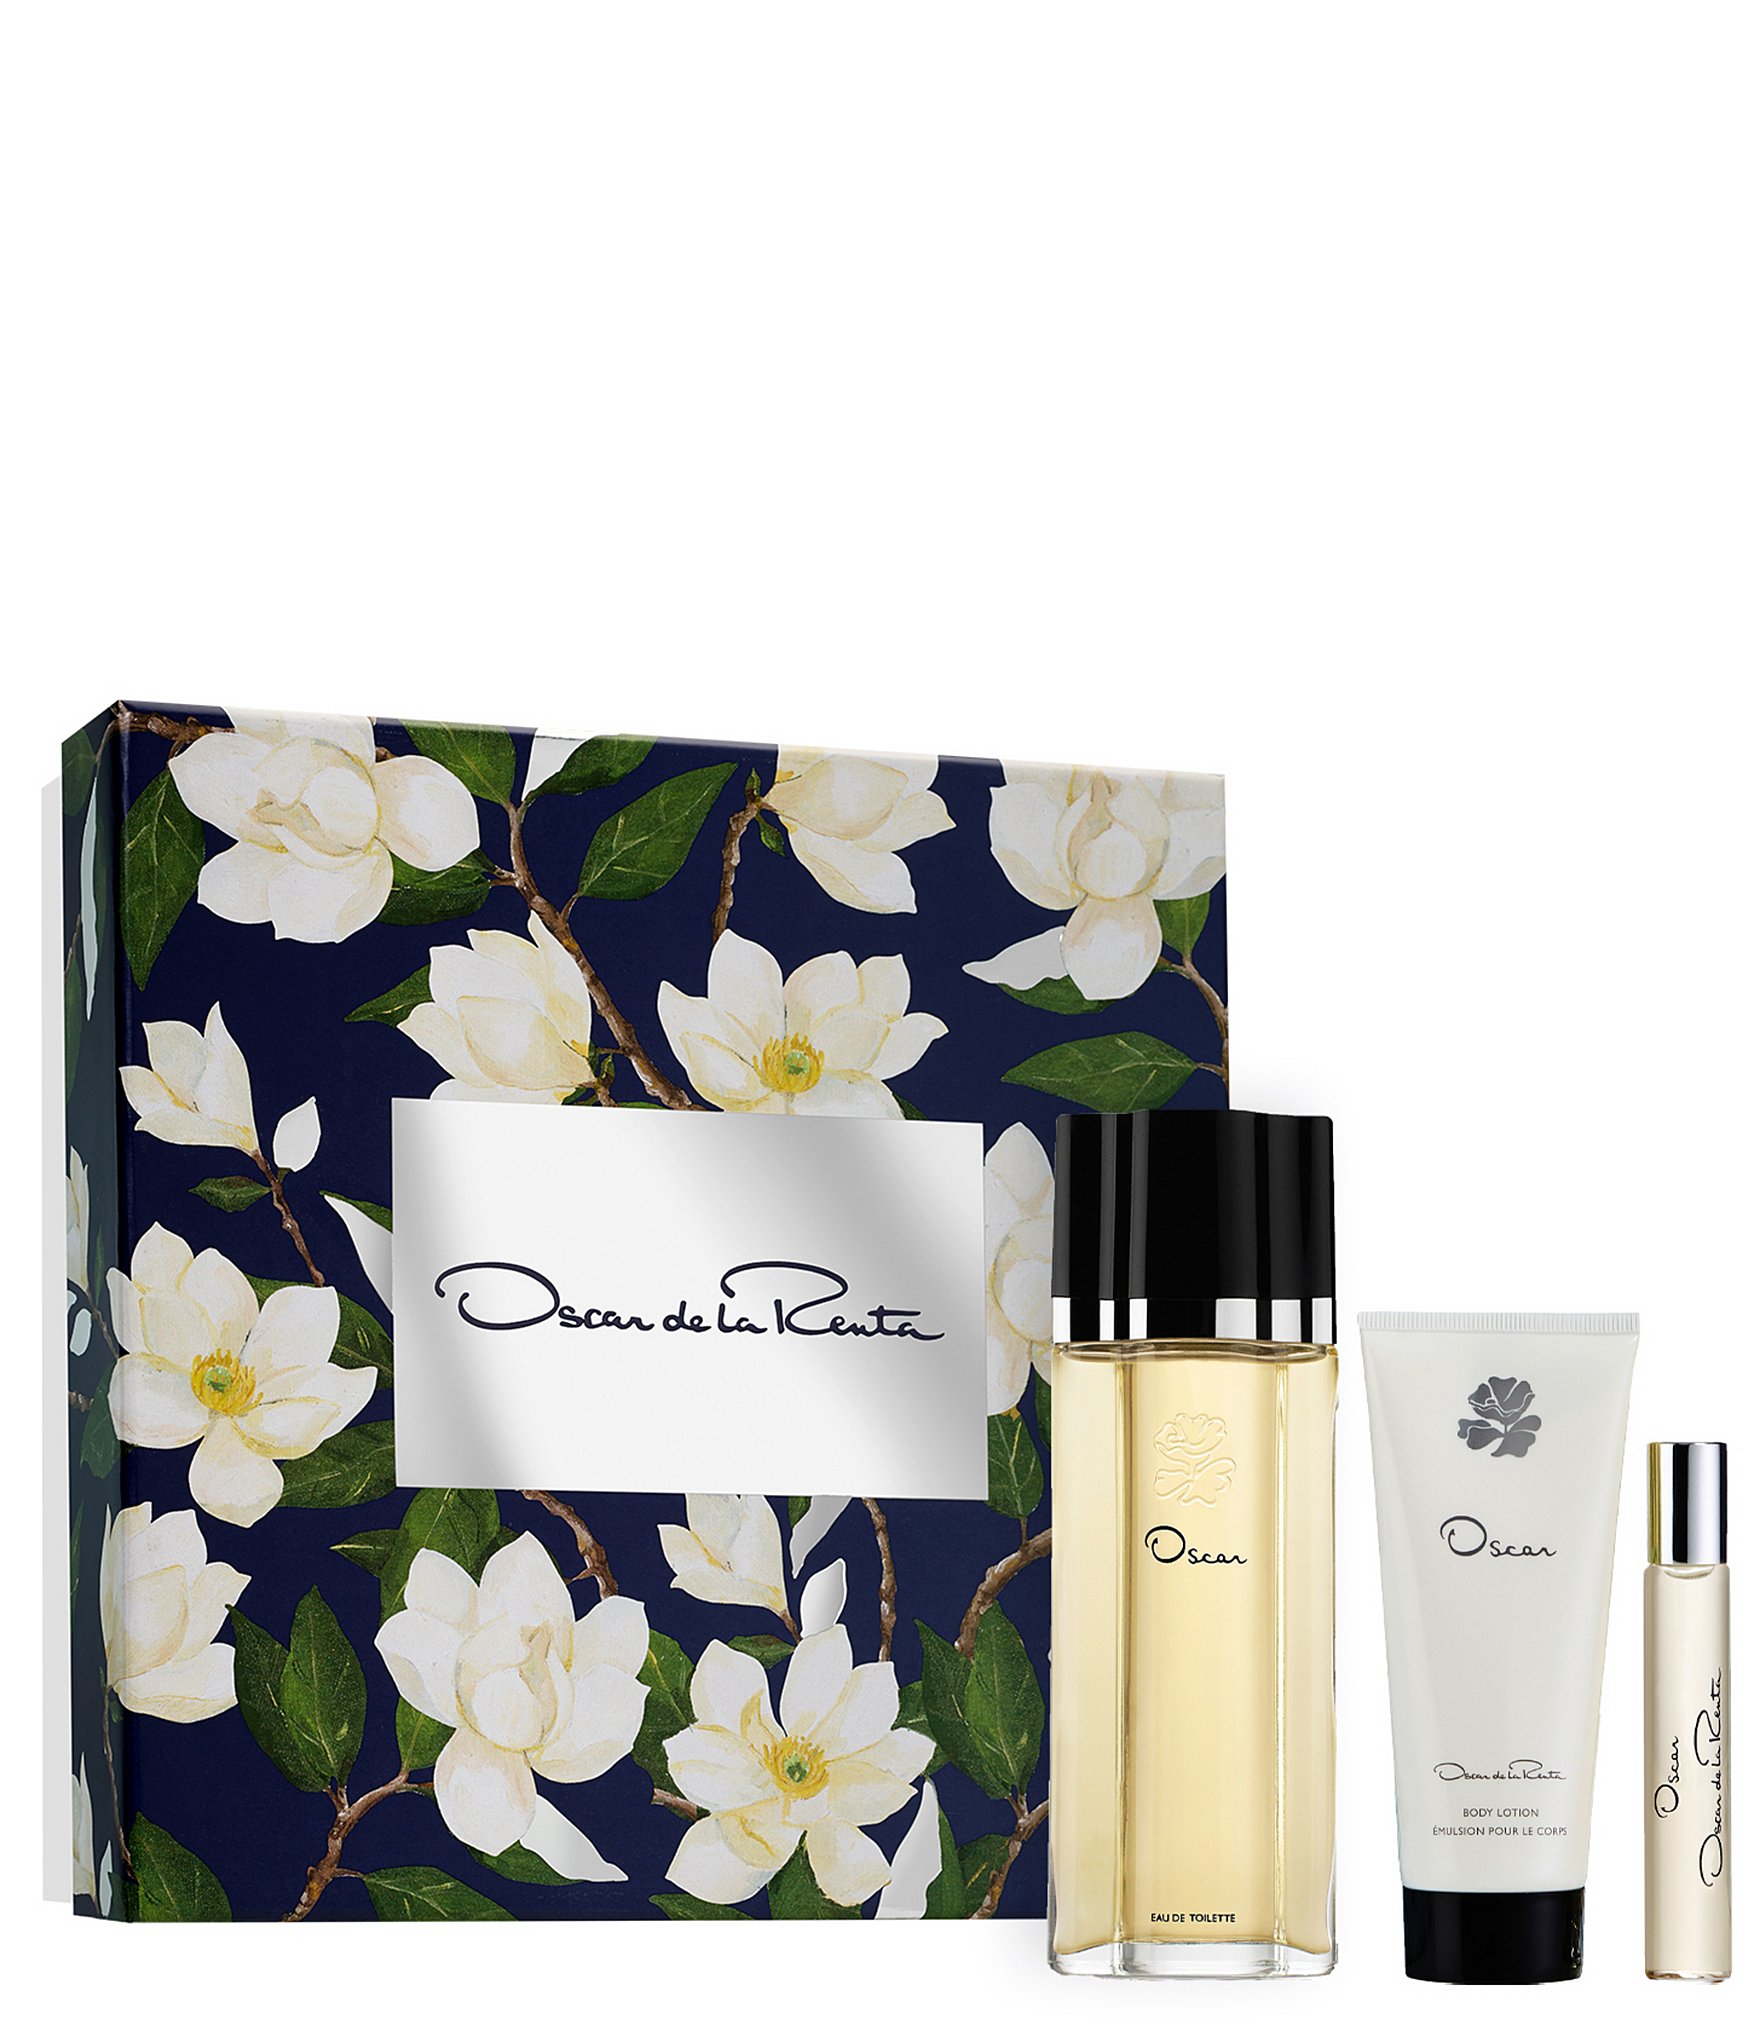 travel perfume: Beauty & Fragrance Gifts & Sets